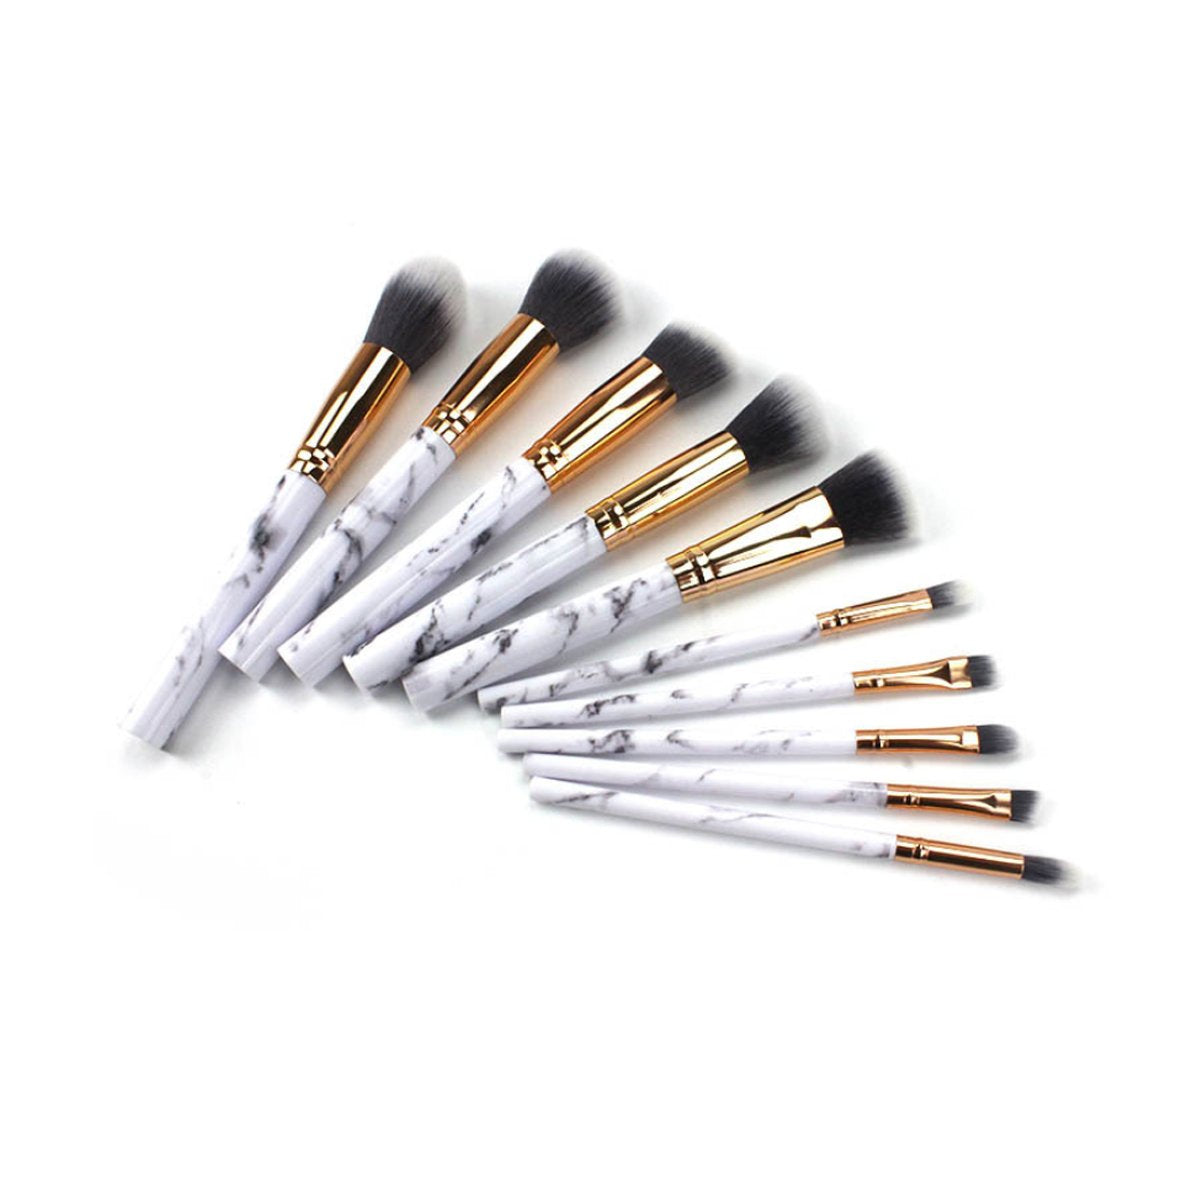 La Canica 10 In 1 Makeup Brush Set With Travel Friendly Container